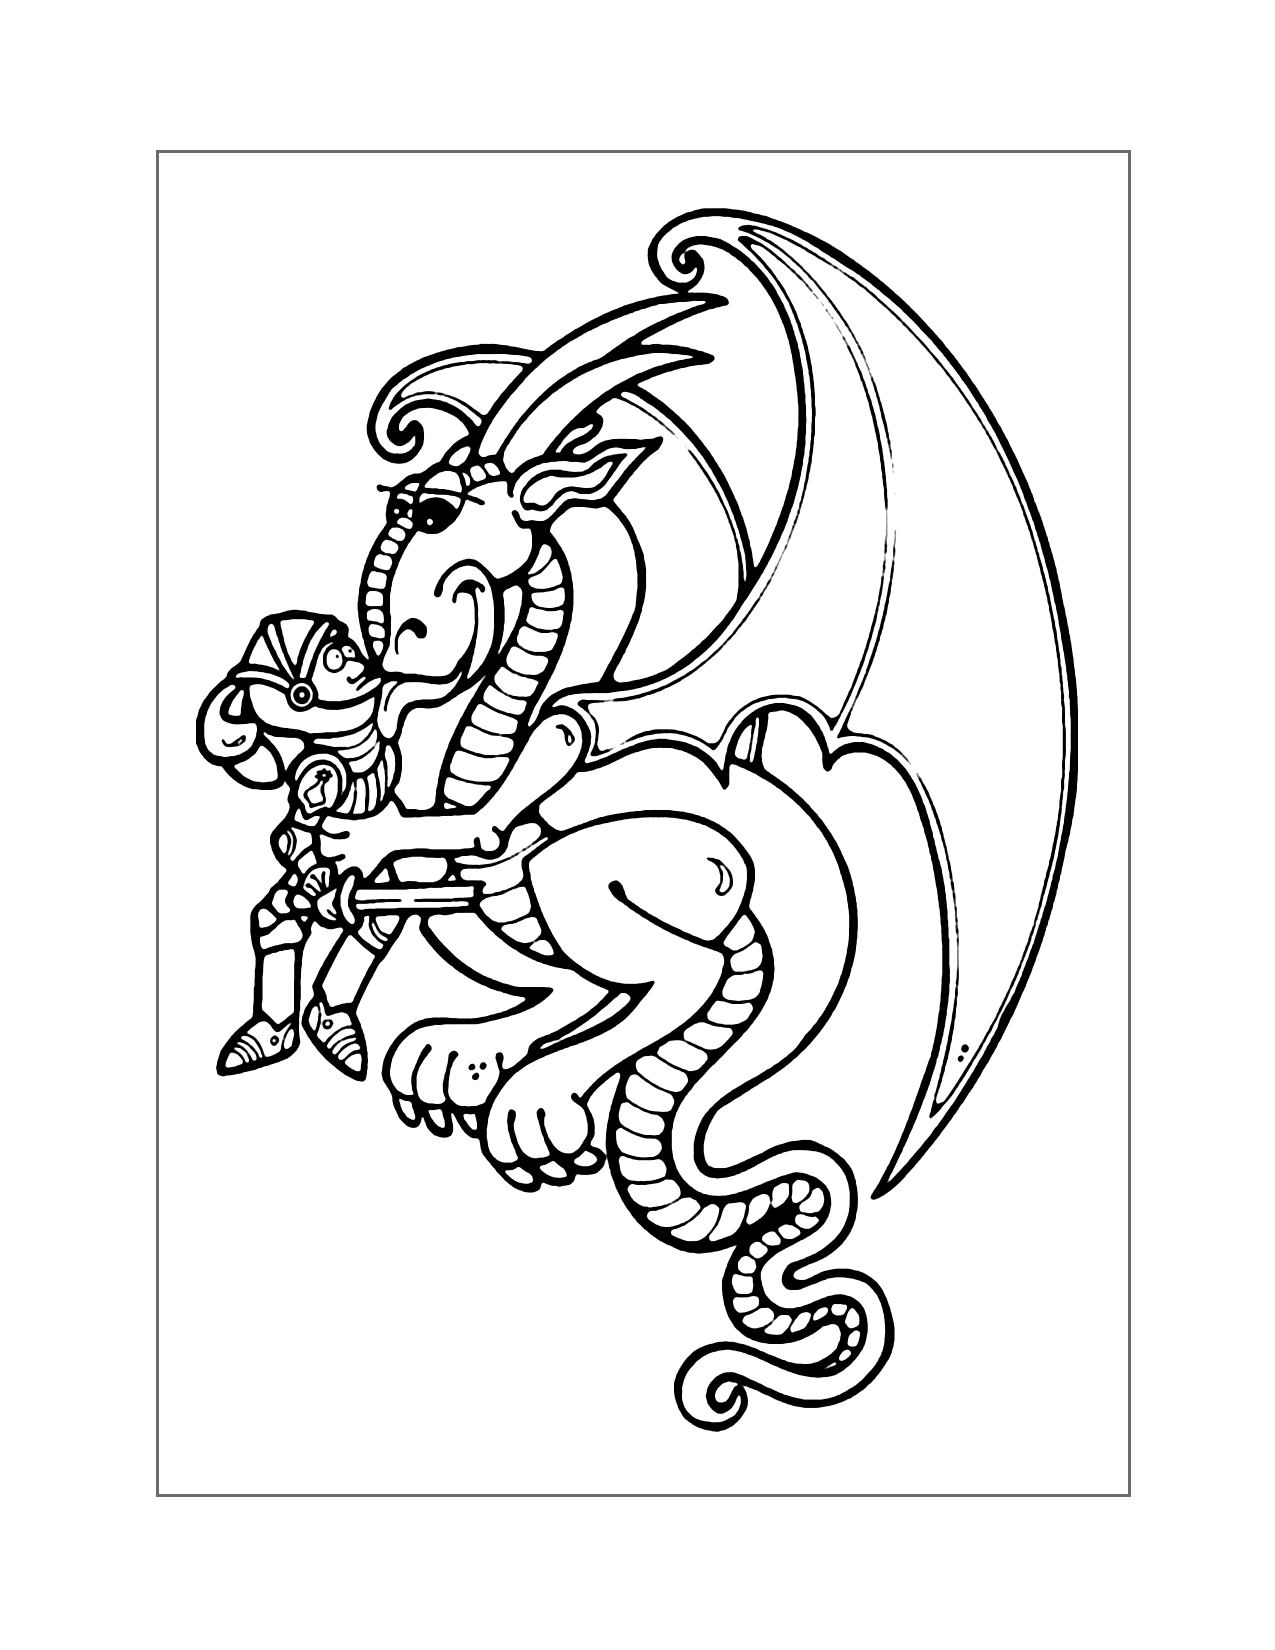 Friendly Medieval Dragon Coloring Page